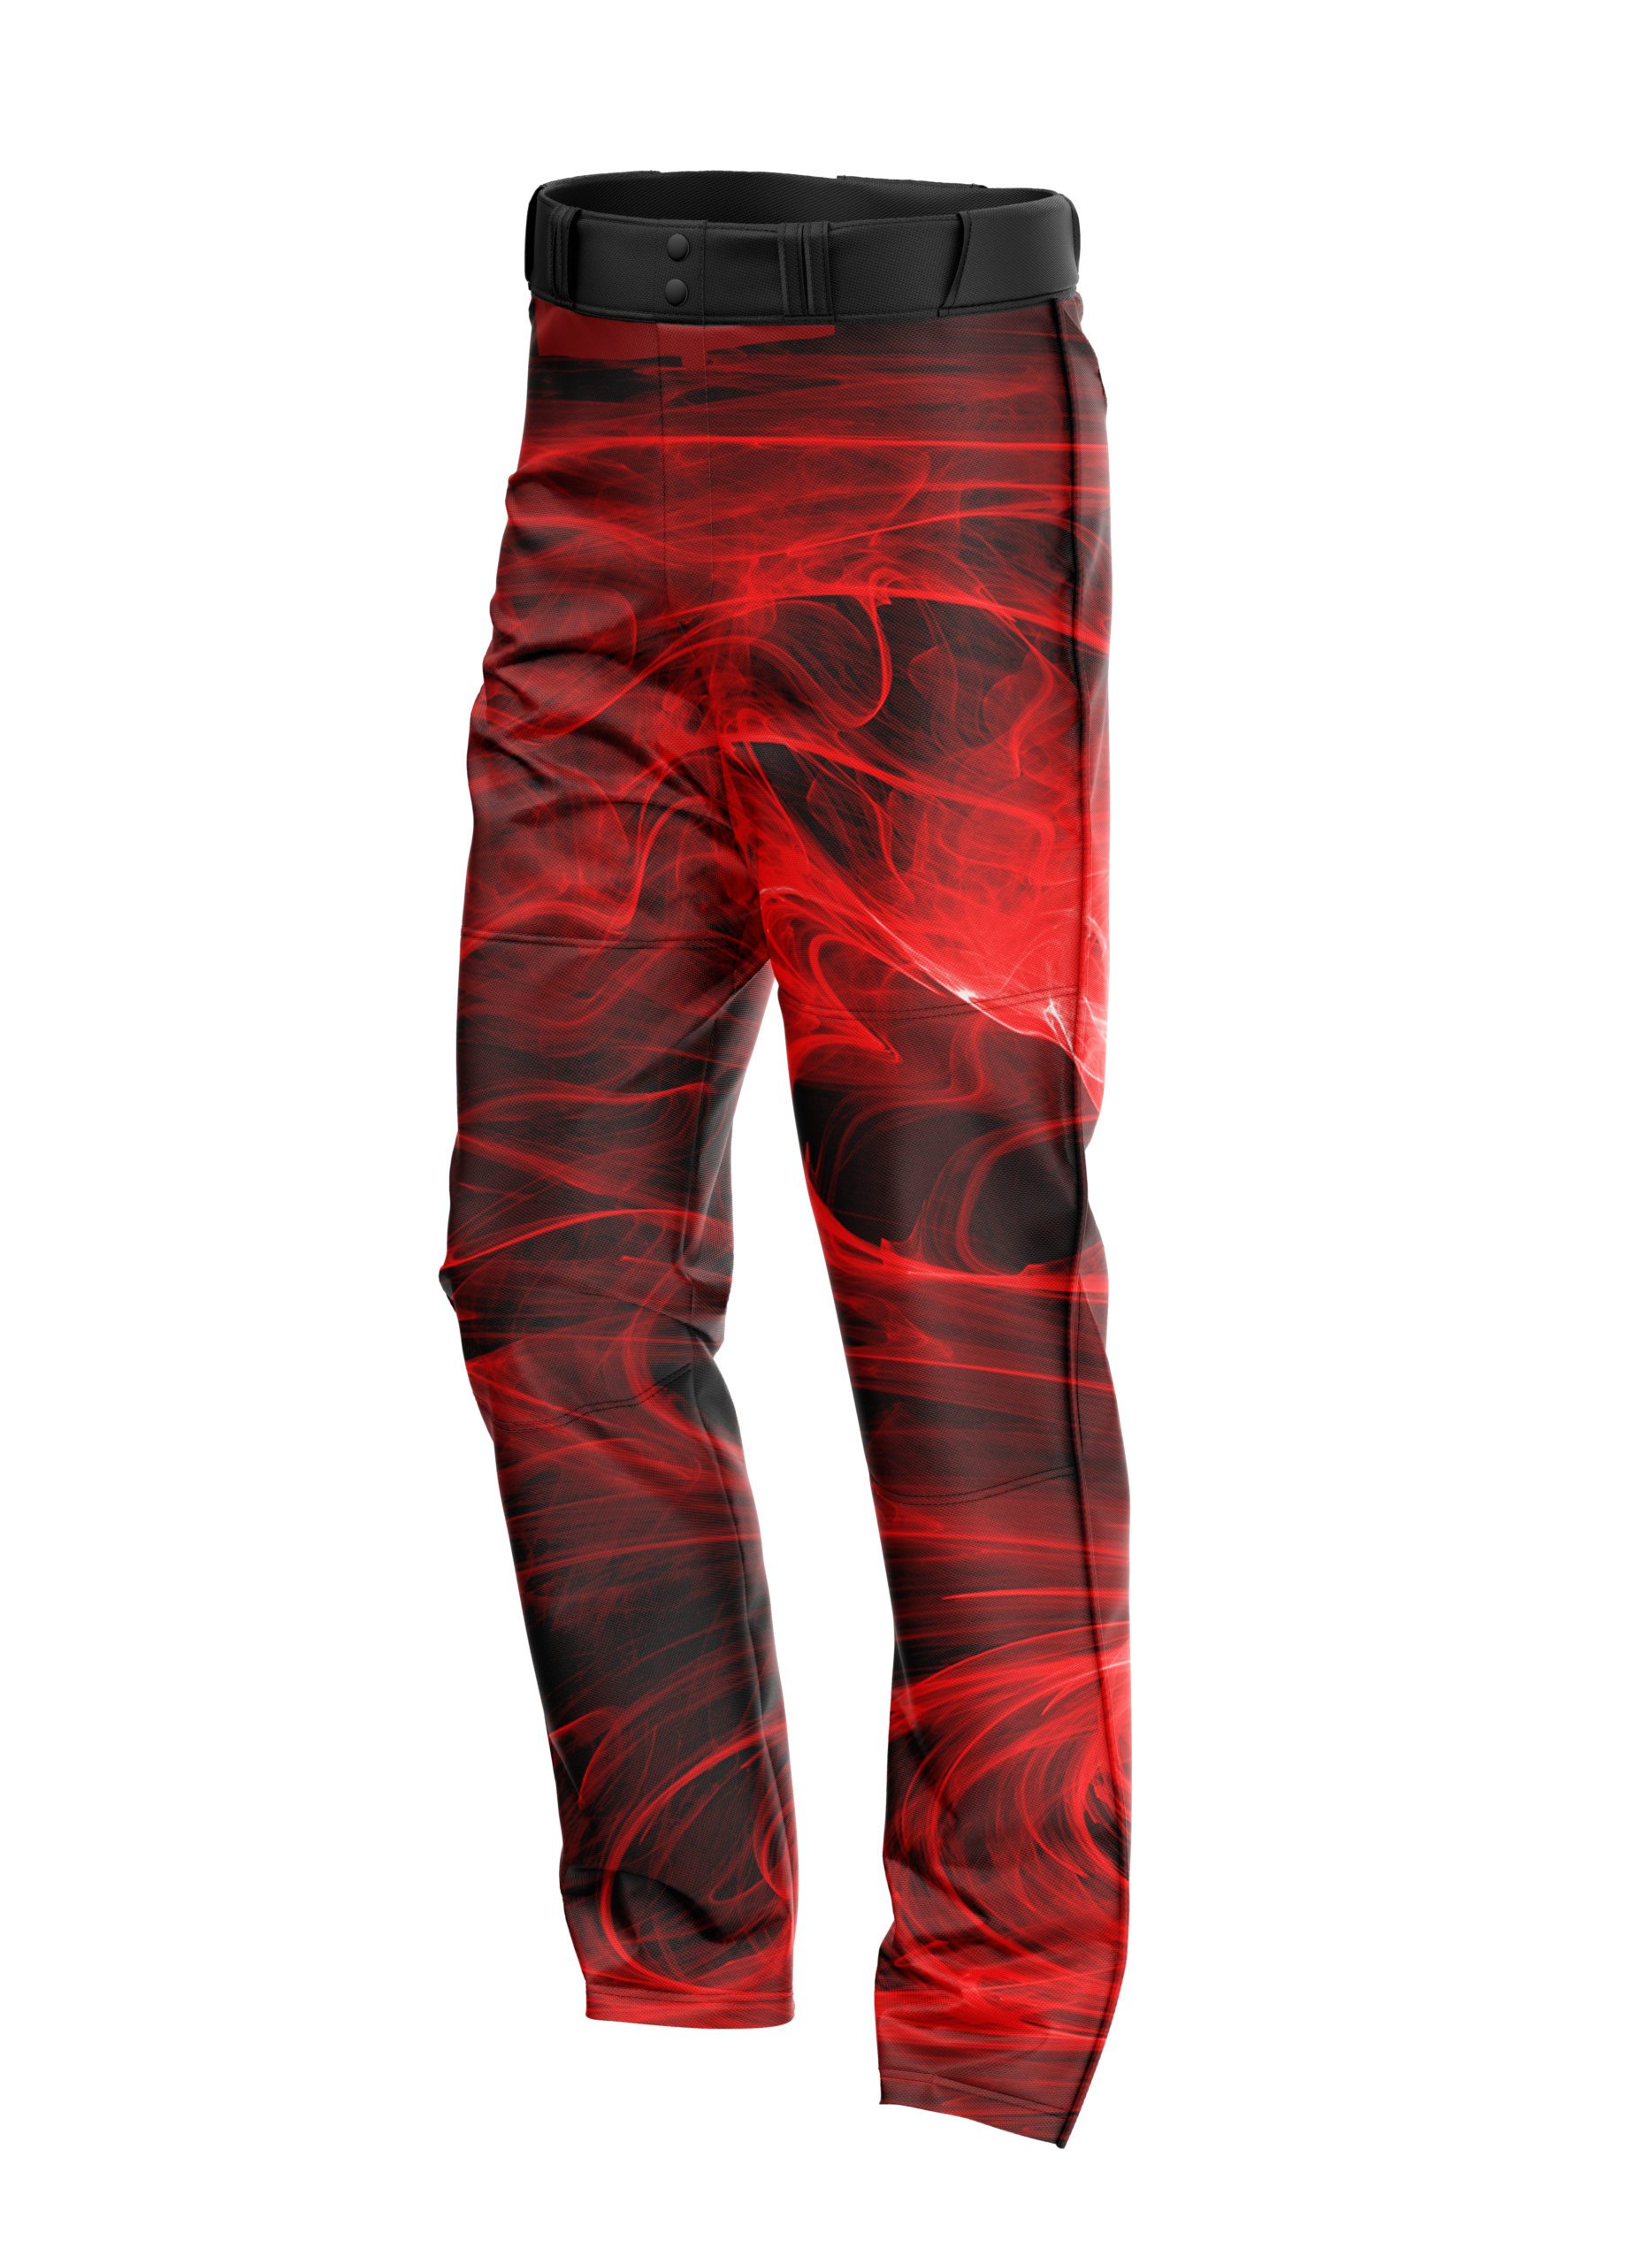 Image of  CoolWick Bowling Pants!